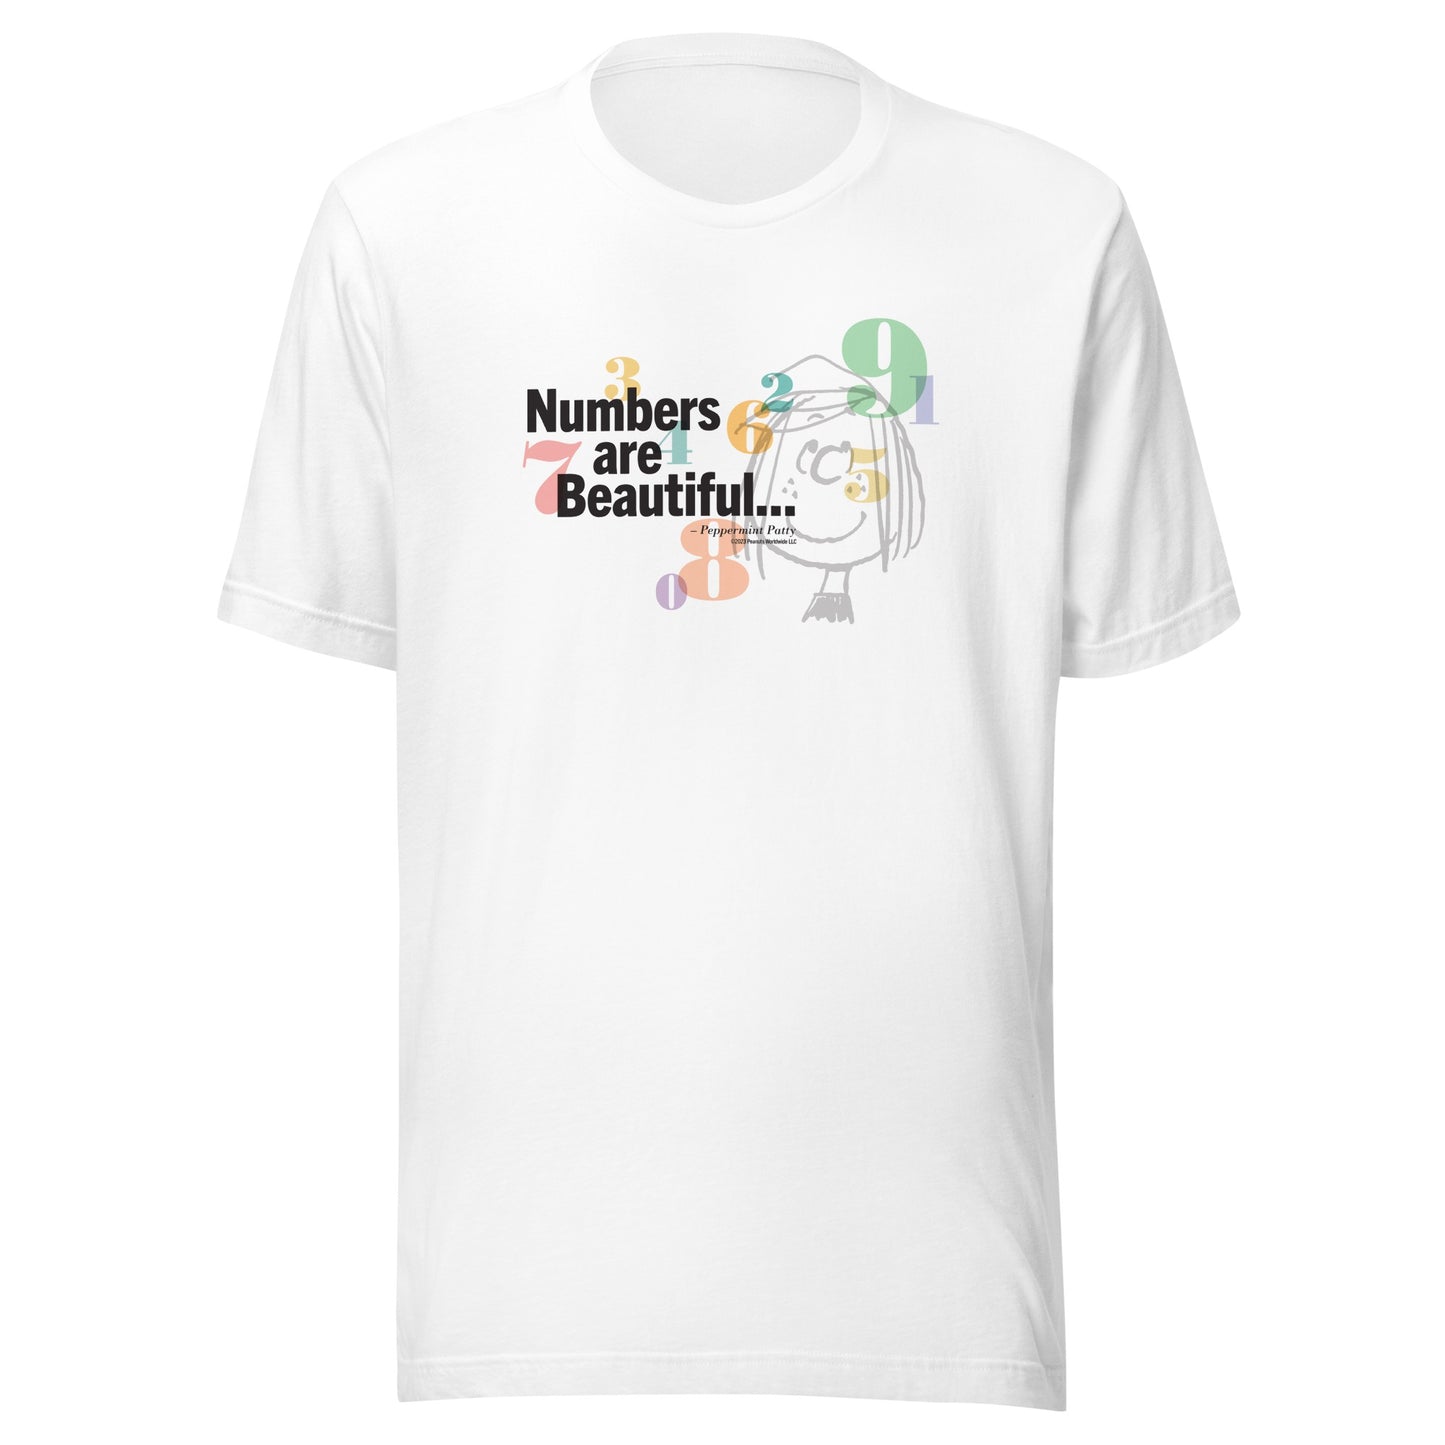 Peppermint Patty Numbers are Beautiful Adult T-Shirt